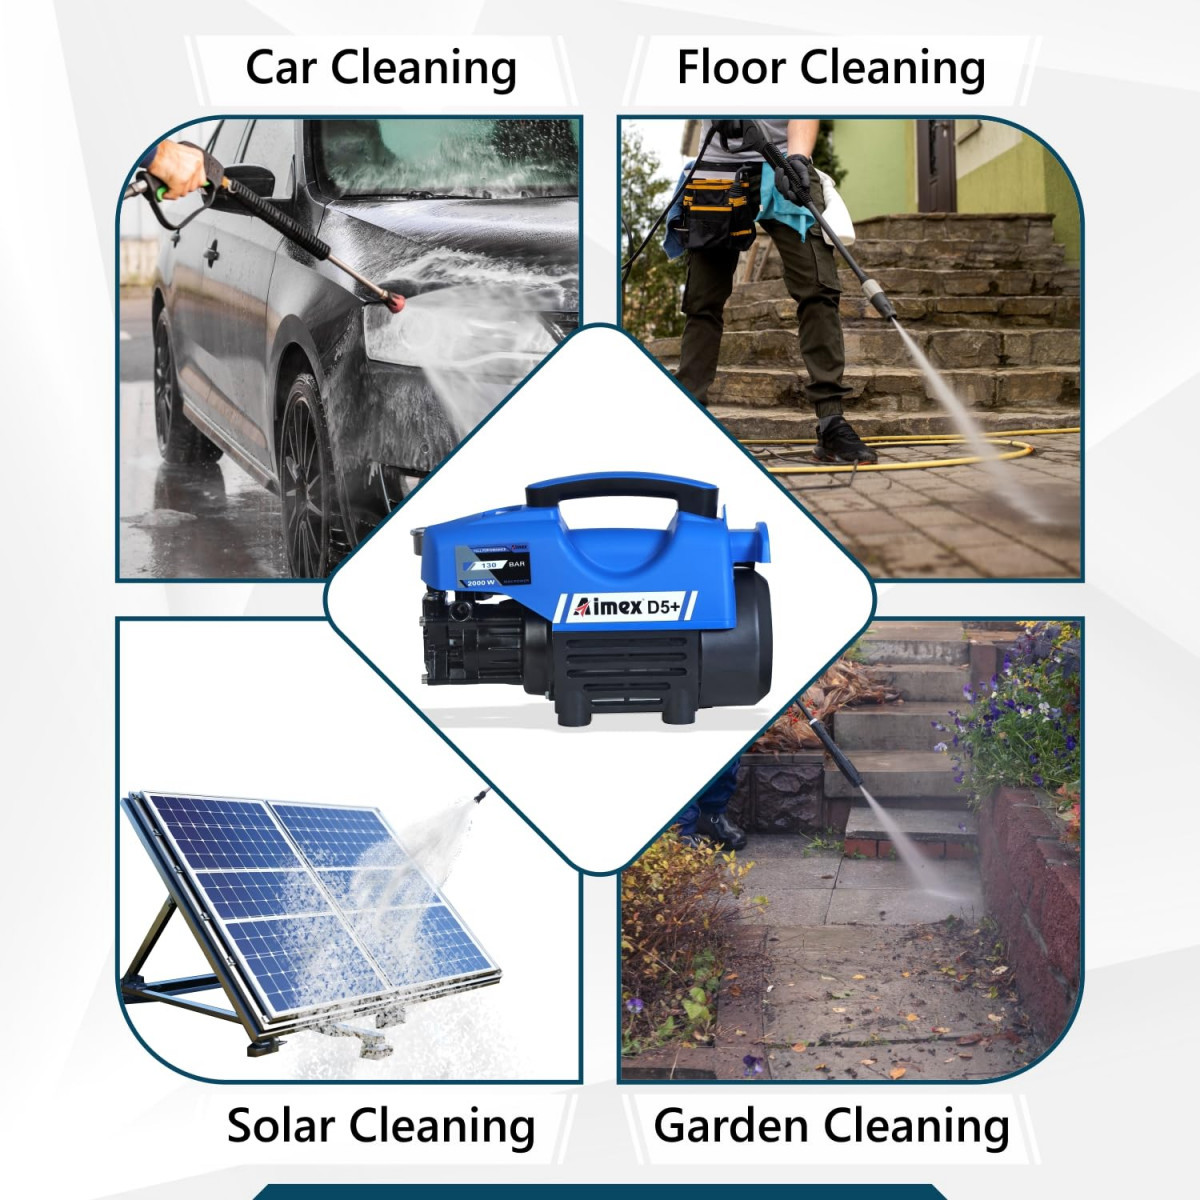 Aimex D5 High Pressure Car Washer Machine for Cleaning Car Bike  Home with 2000 Watts and Pressure 130 Bar with Copper Winding D5